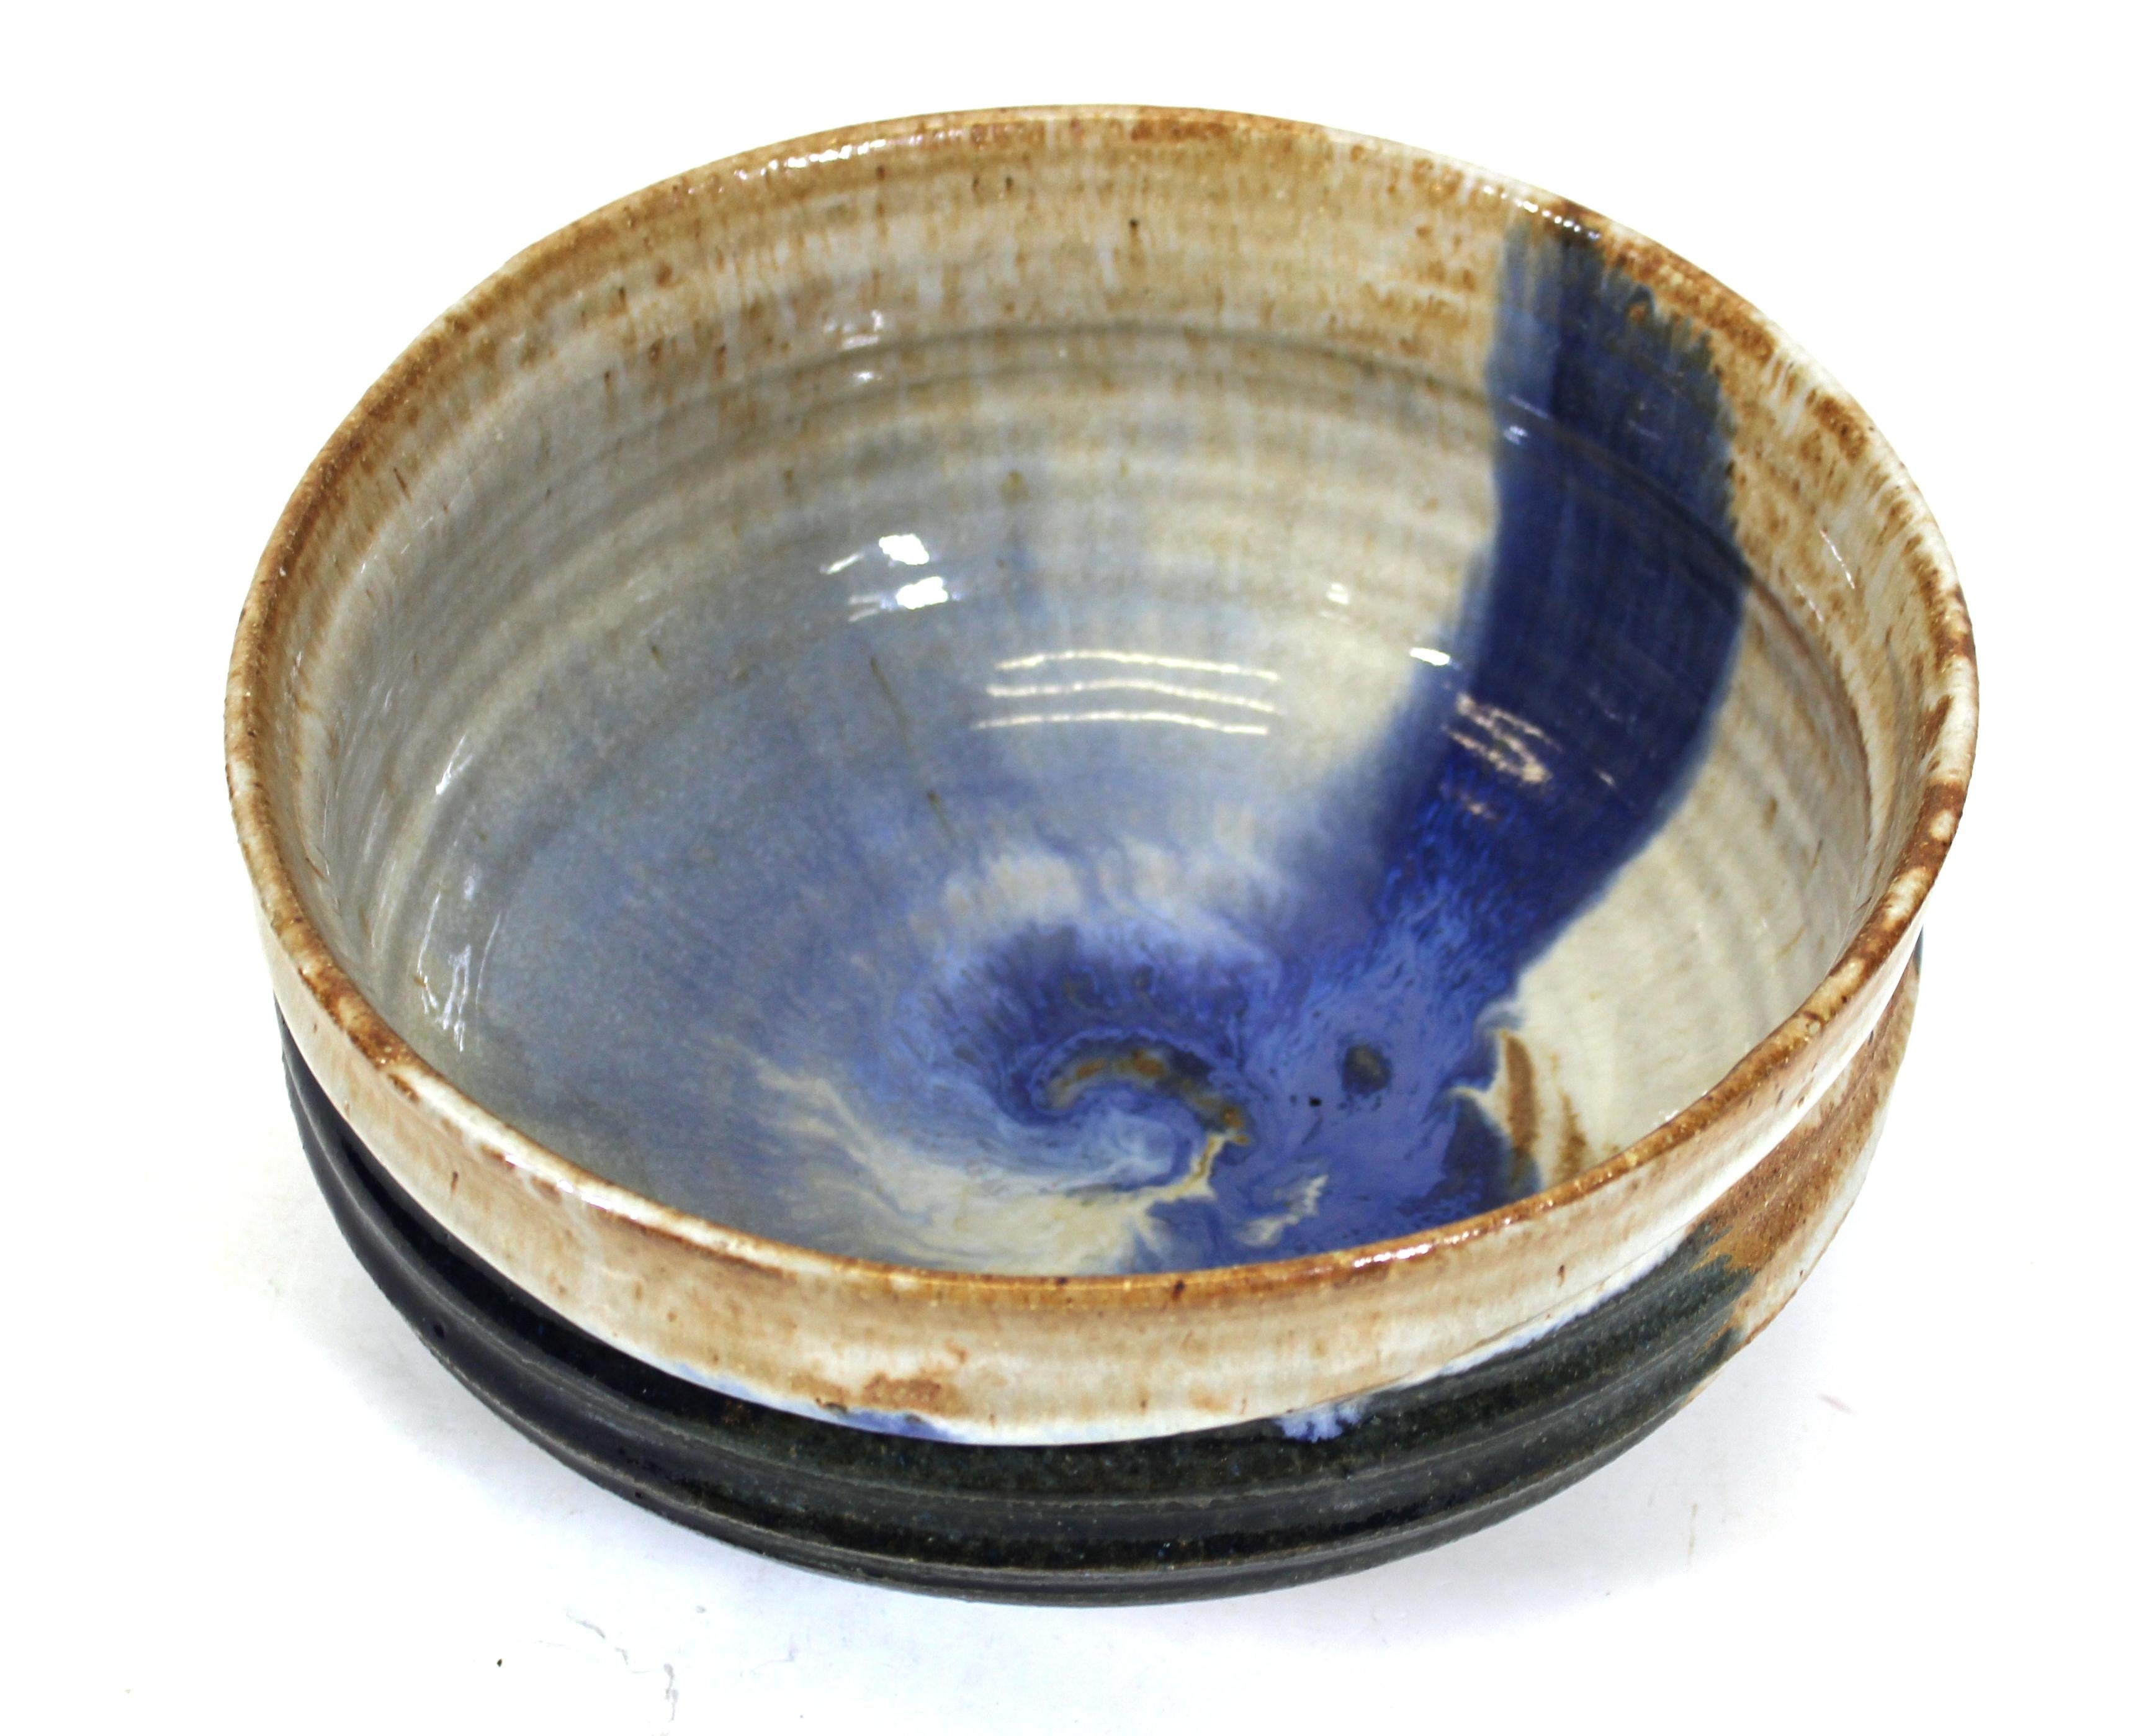 Mid-Century Modern style art Studio Pottery bowl with blue and white glaze, signed illegibly on the bottom.